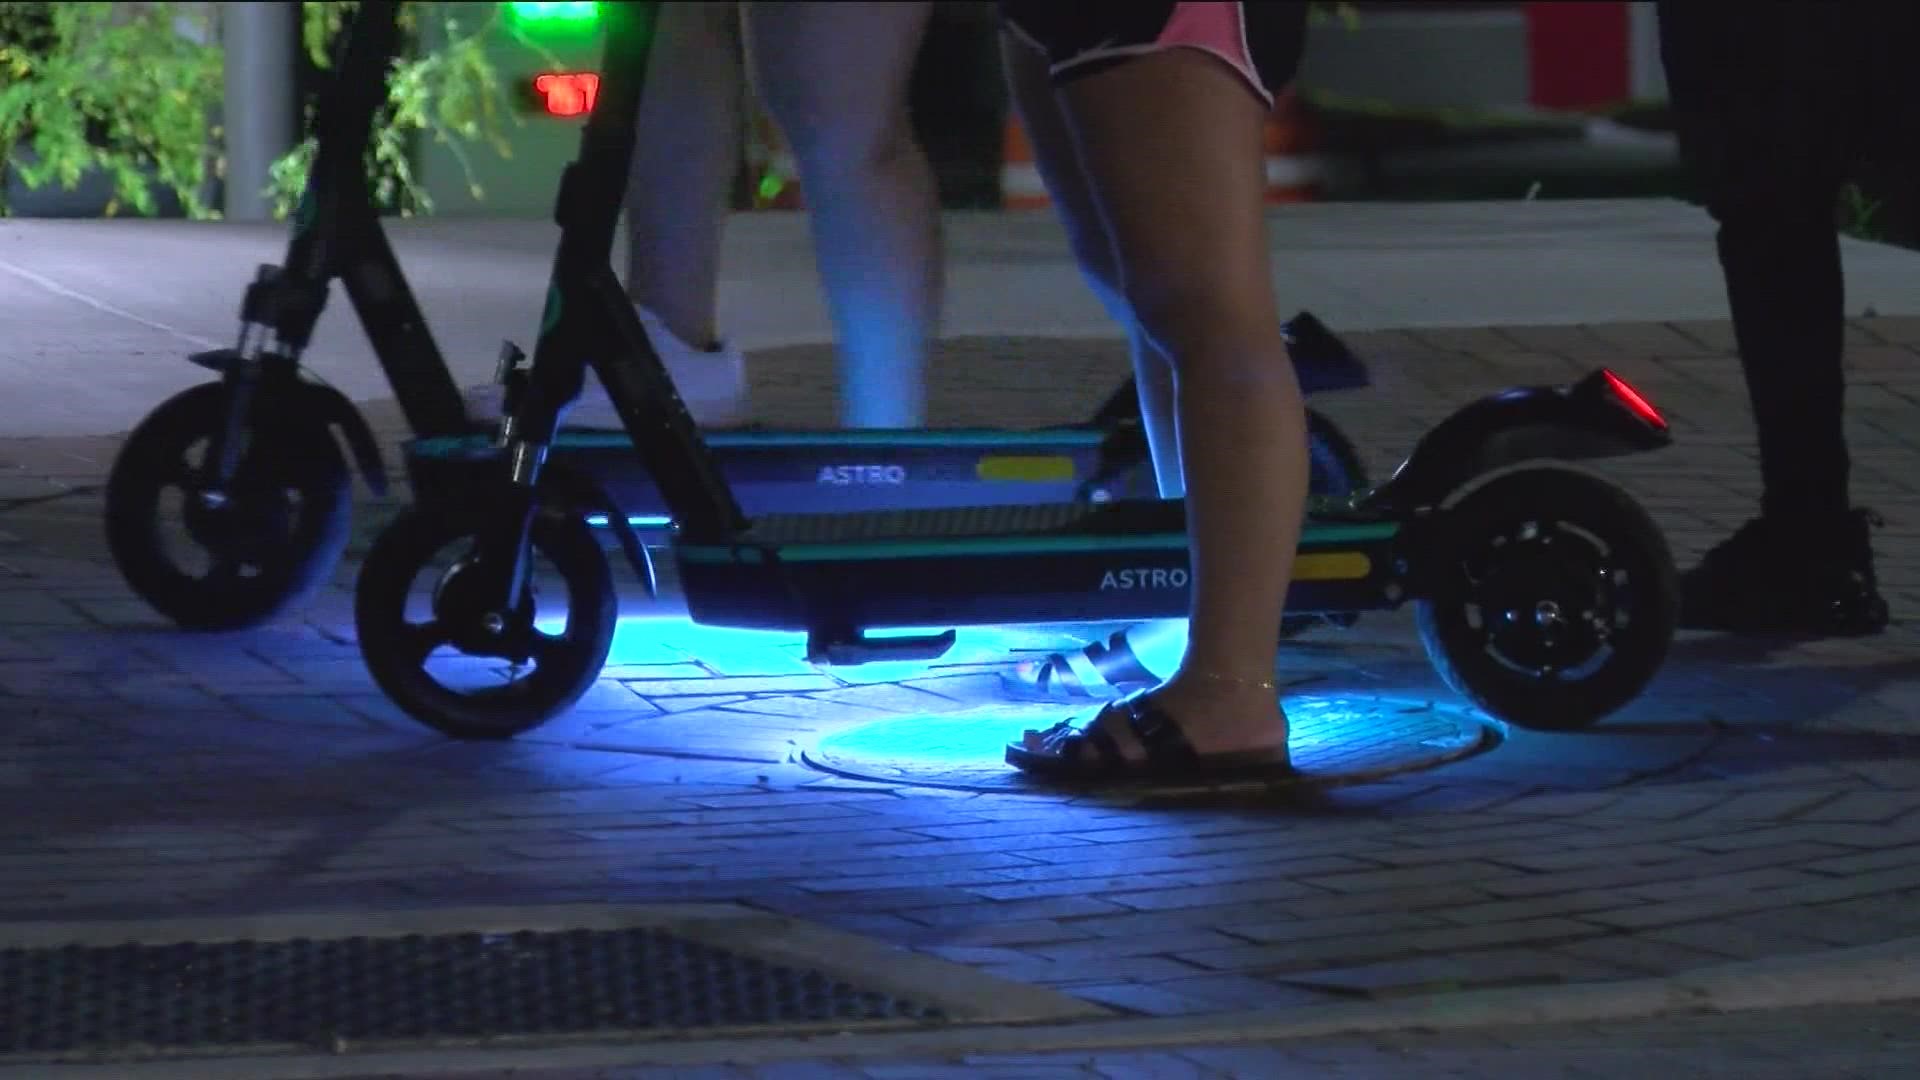 The Ability Center has received complaints that scooters are left by riders, blocking sidewalks.